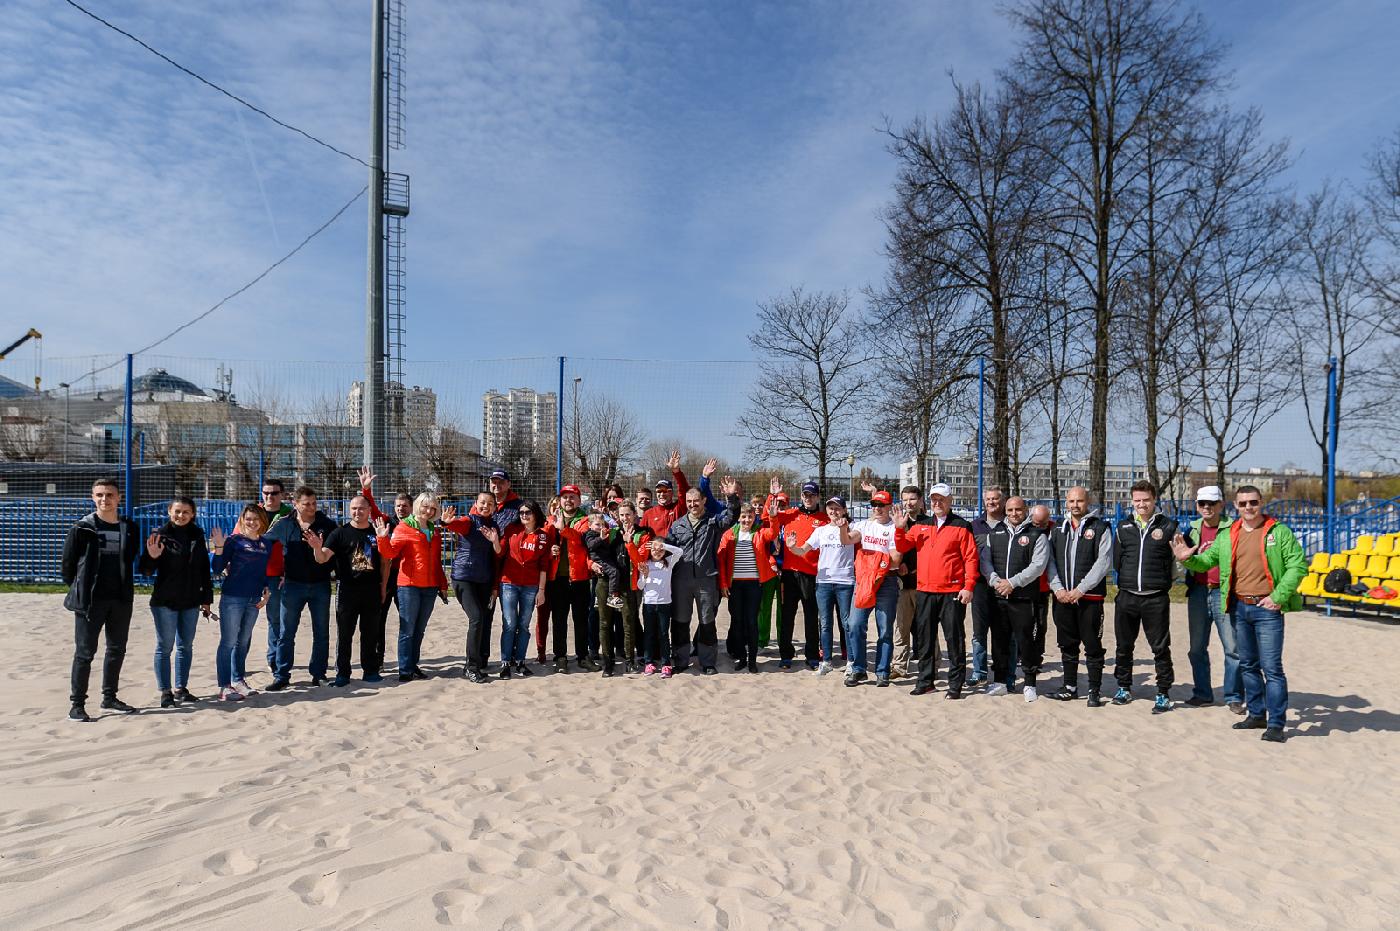 On April 20 the NOC Belarus took part in the community work day